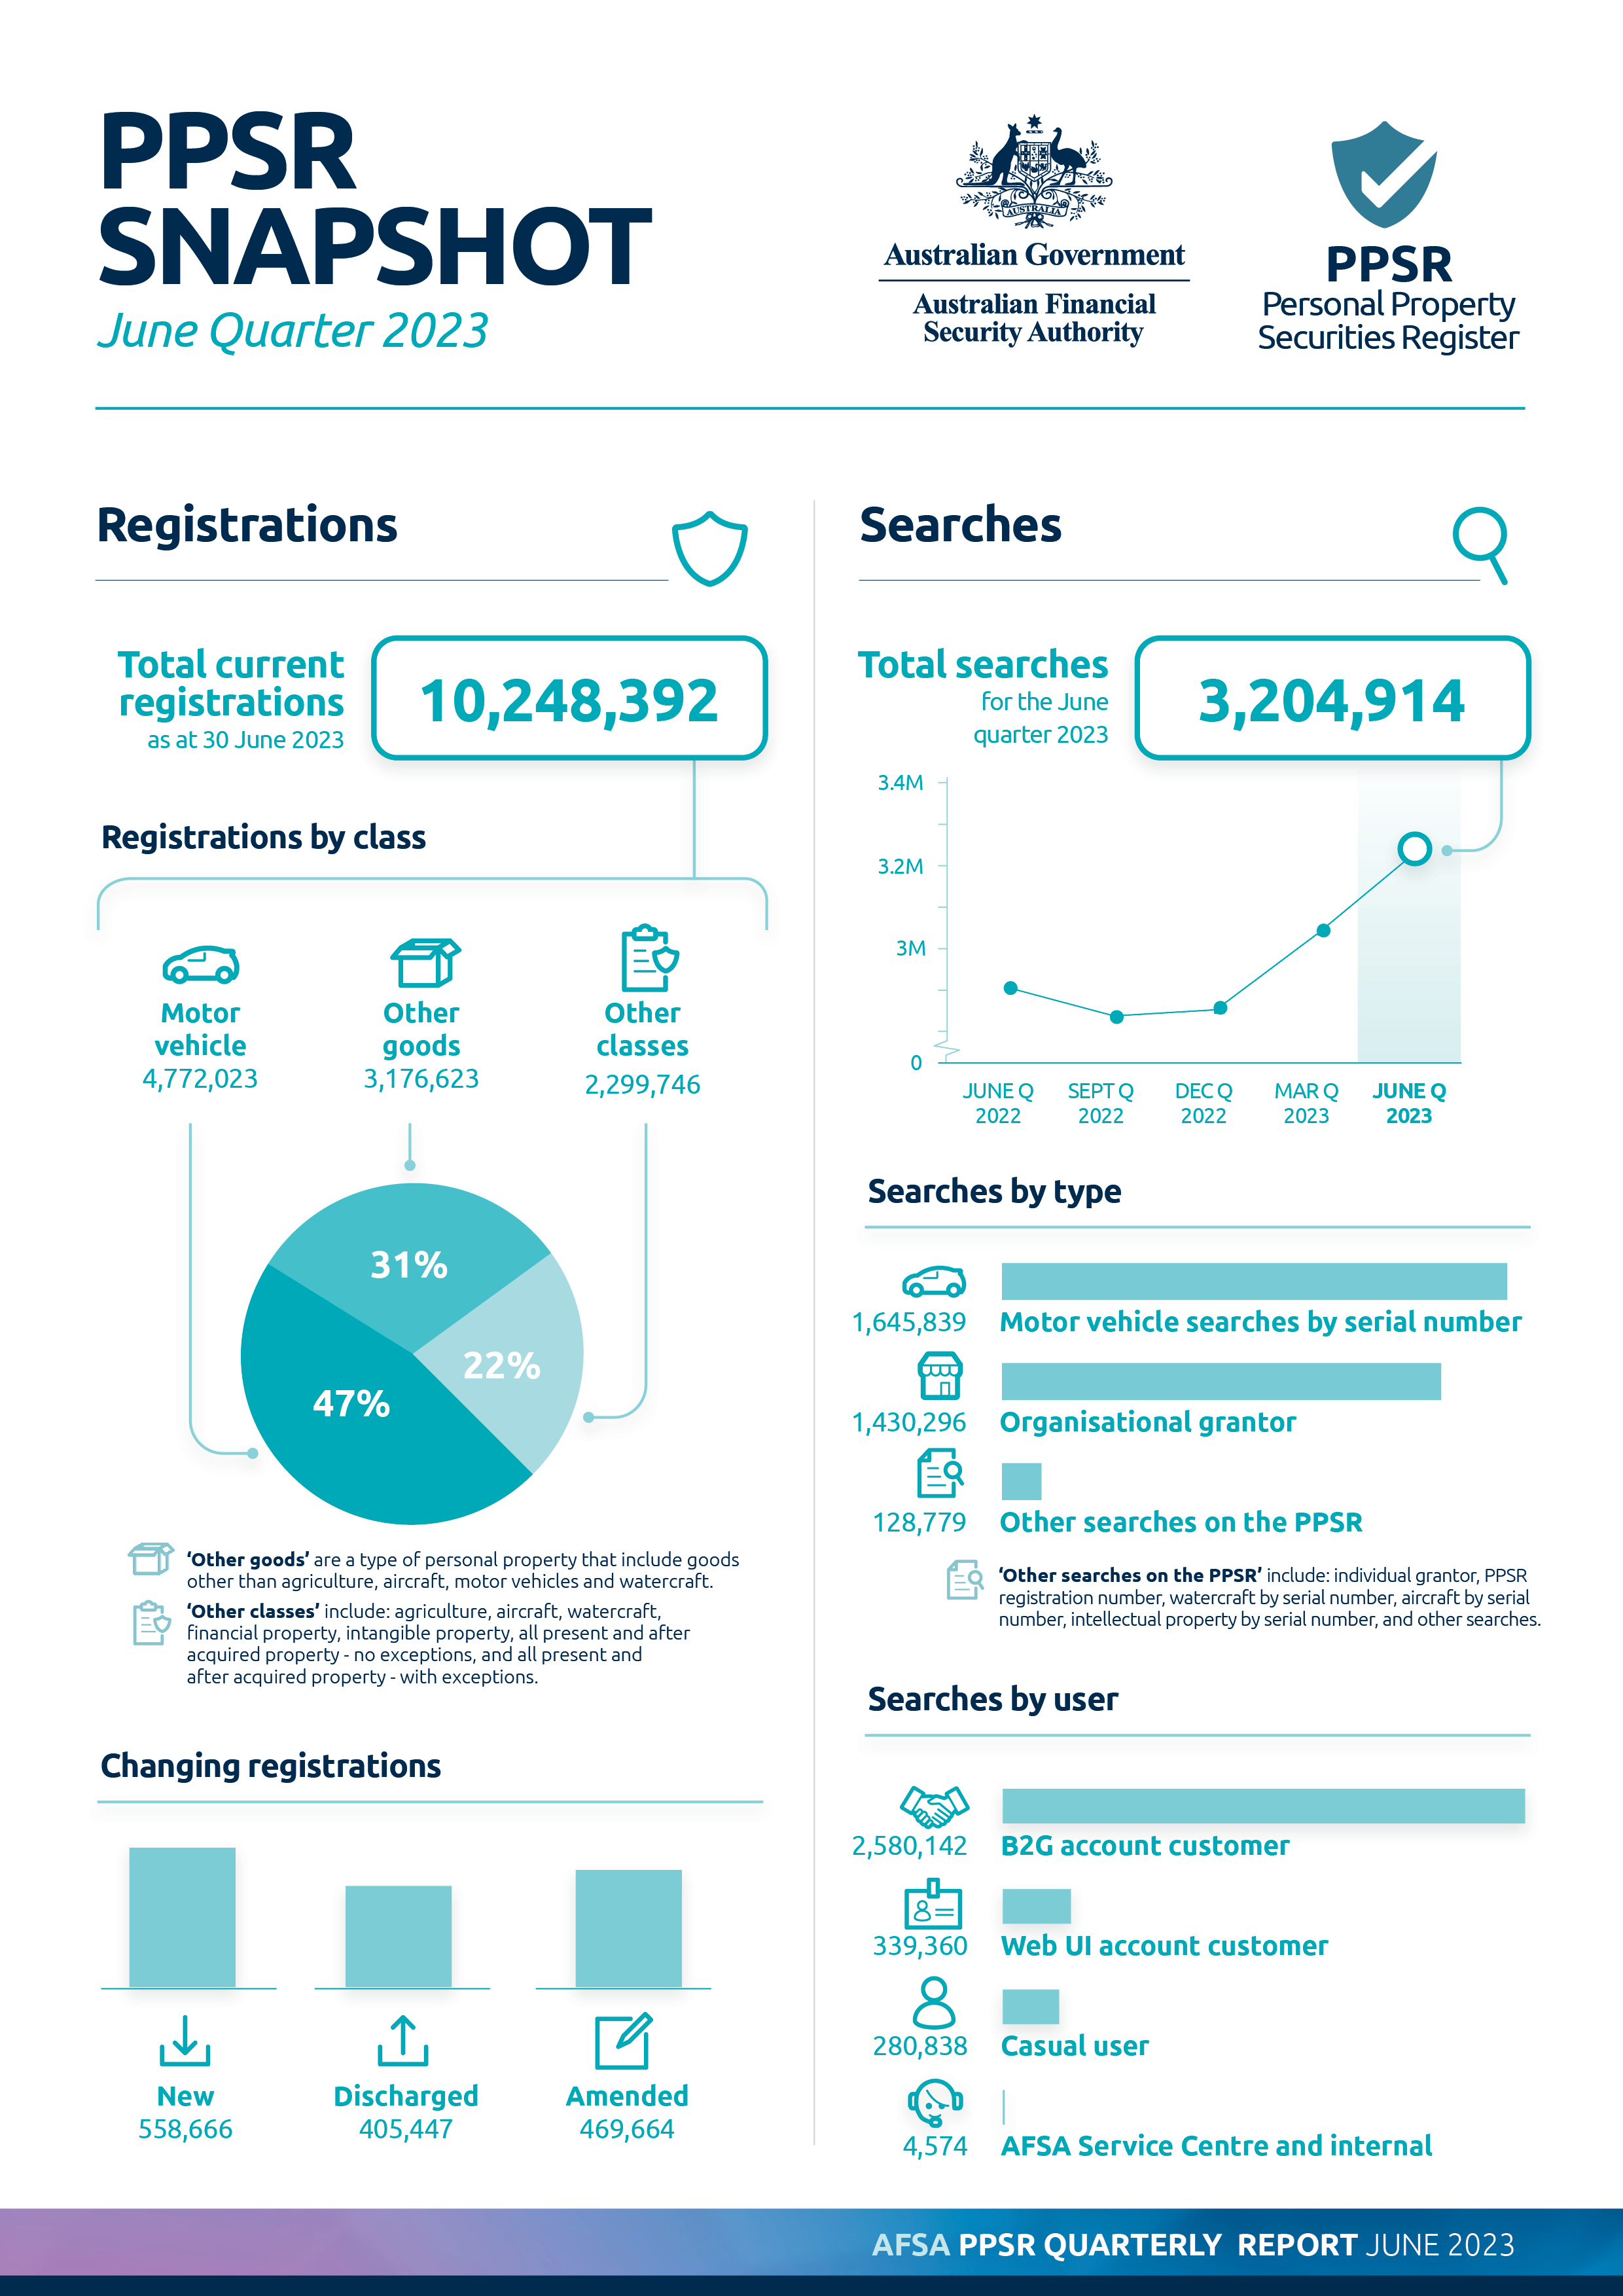 Snapshot of the PPSR (Personal Property Securities Register) activities during the June Quarter of 2023. The image encompasses both registration and search details. A concise overview of the data can be found in the attached media release. For an in-depth analysis, consult the available workbooks on the PPSR Quarterly Statistics page